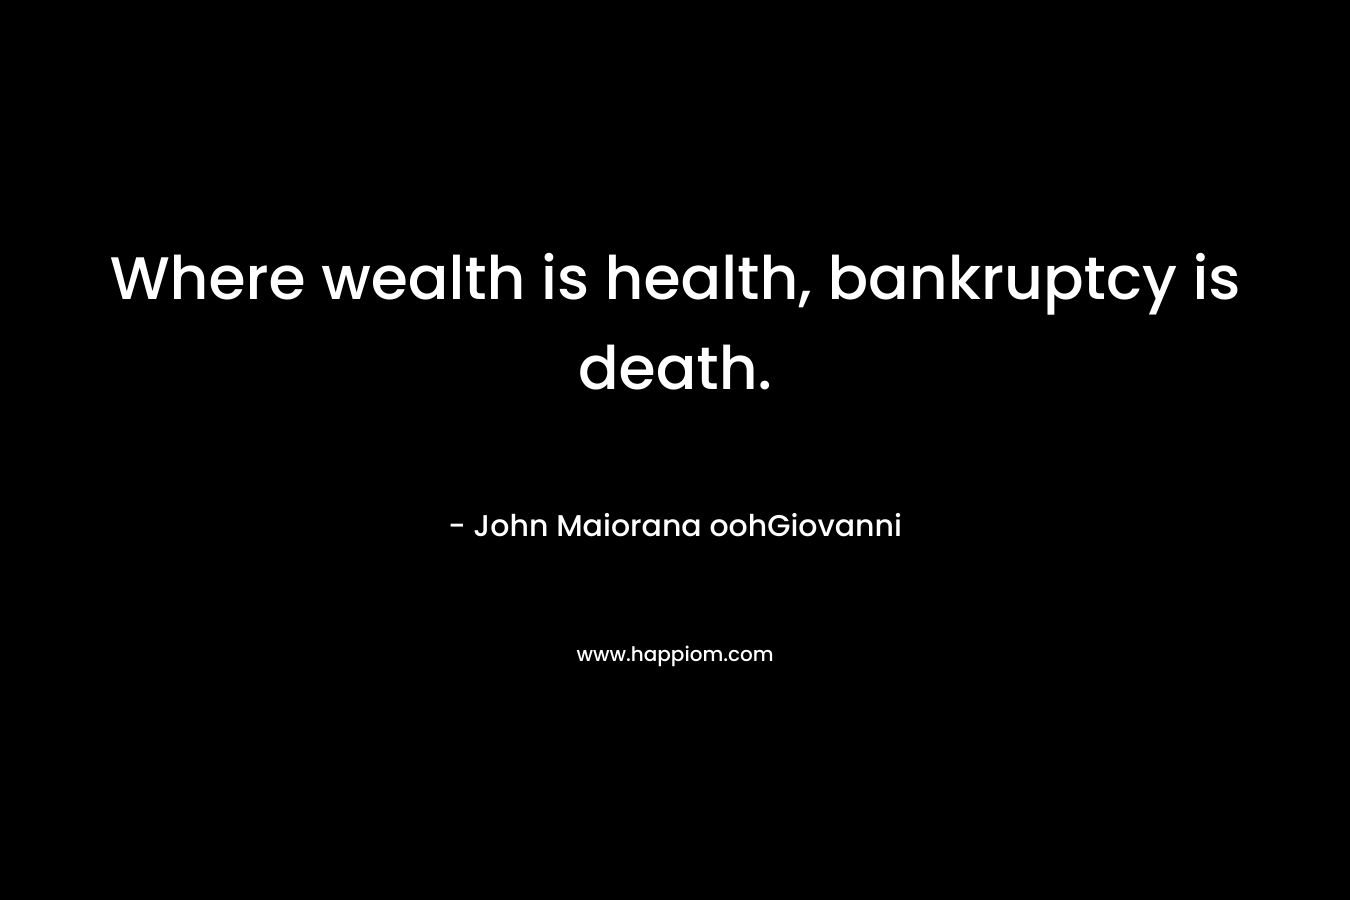 Where wealth is health, bankruptcy is death.